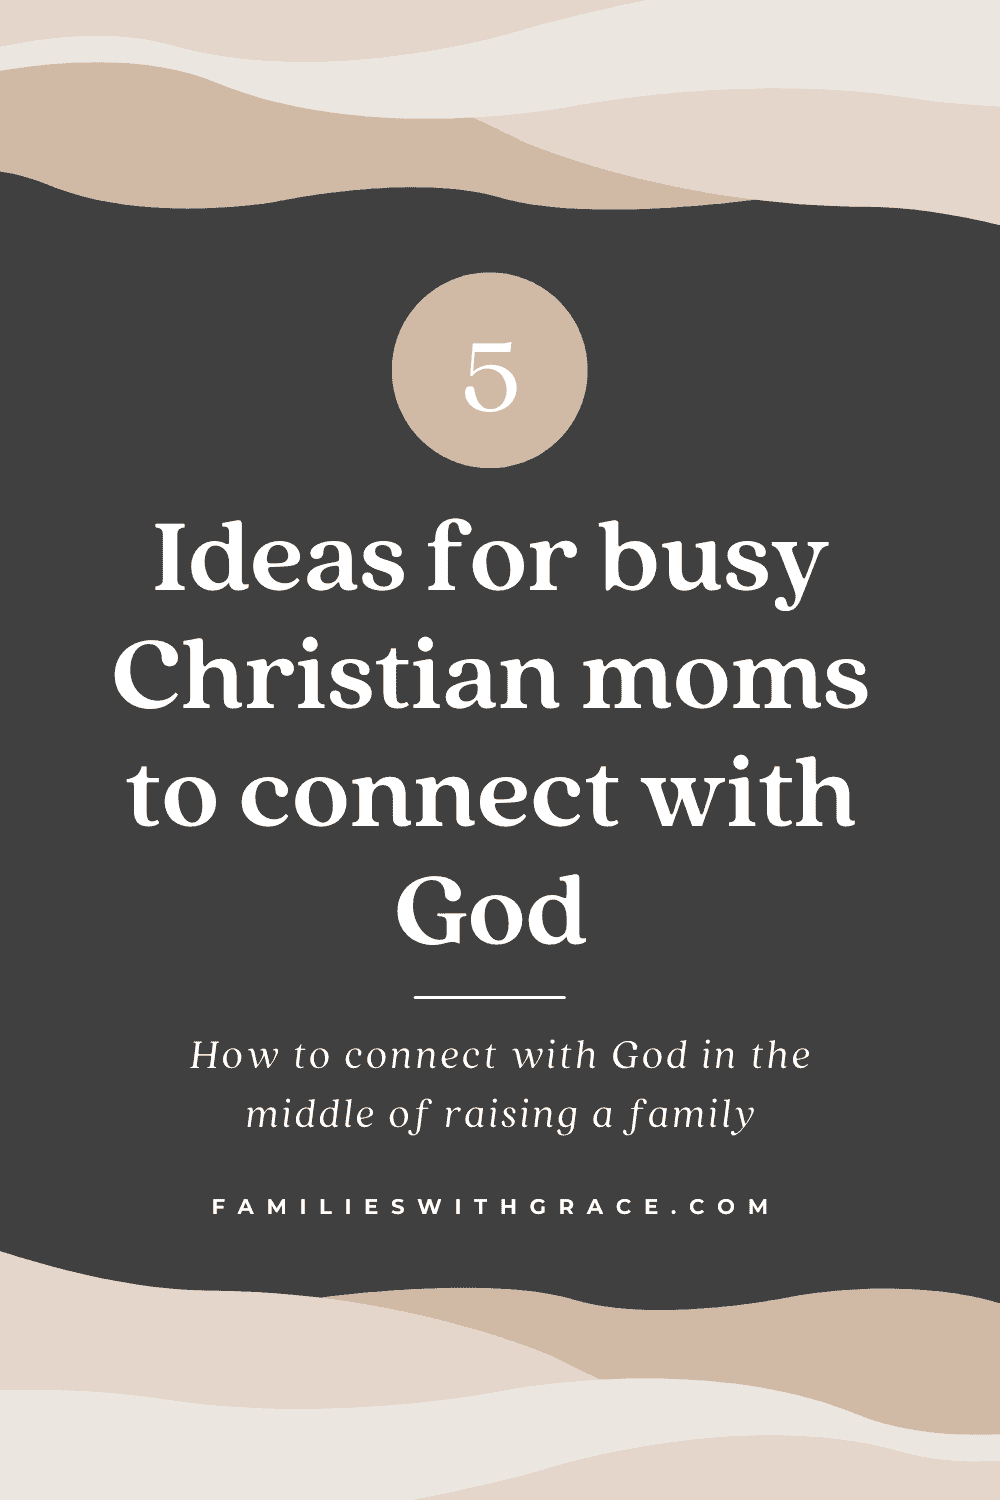 How to connect with God in the middle of raising a family